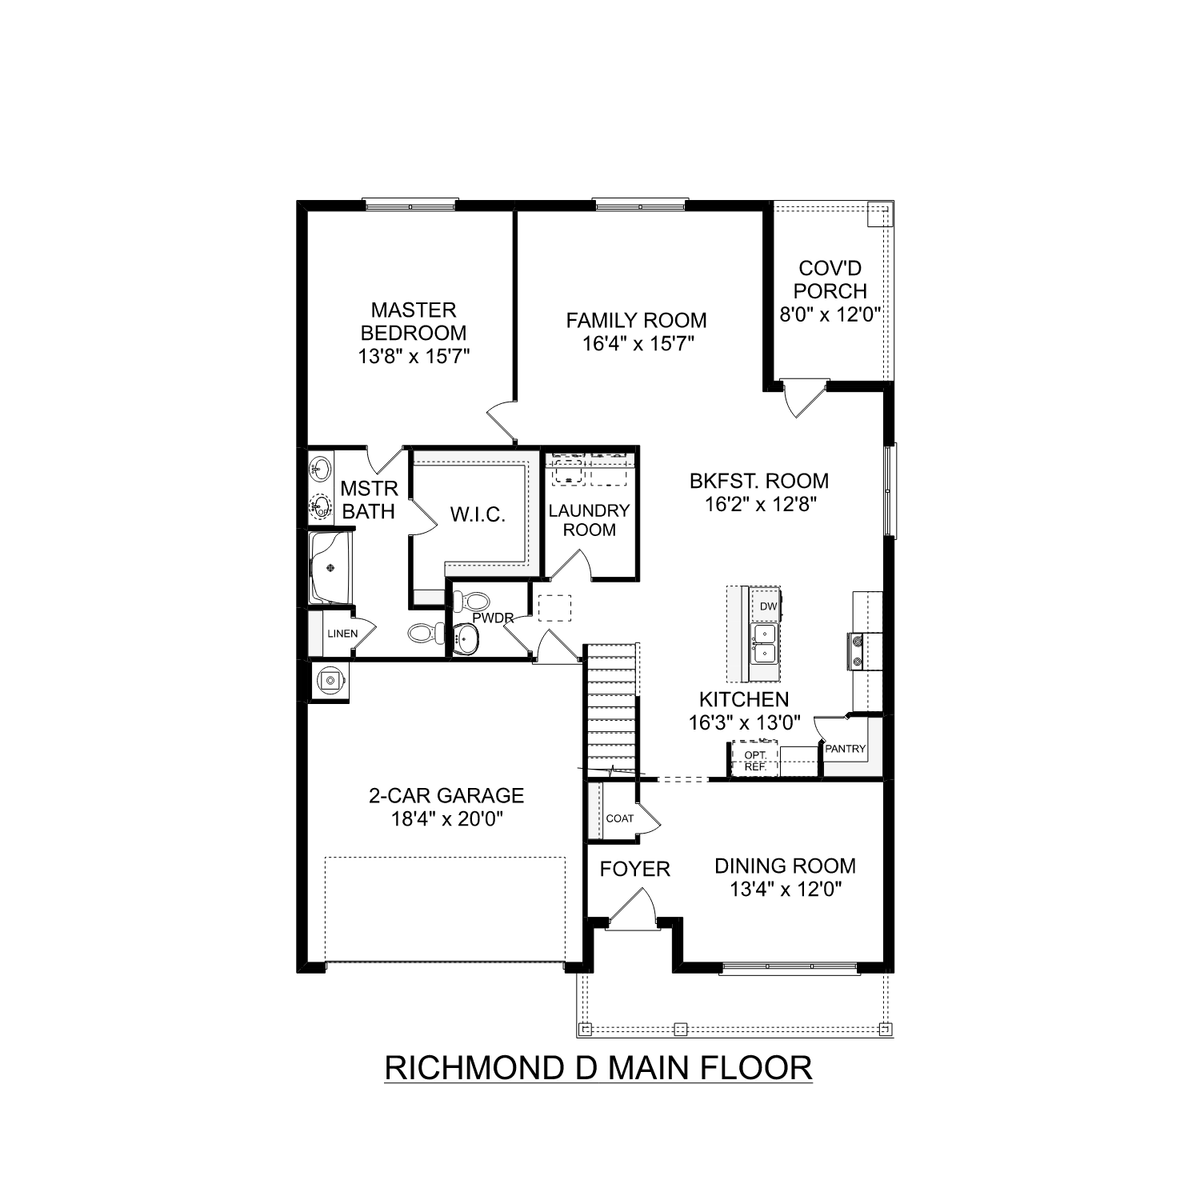 1 - The Richmond D floor plan layout for 227 Irish Hill Drive in Davidson Homes' Walker's Hill community.